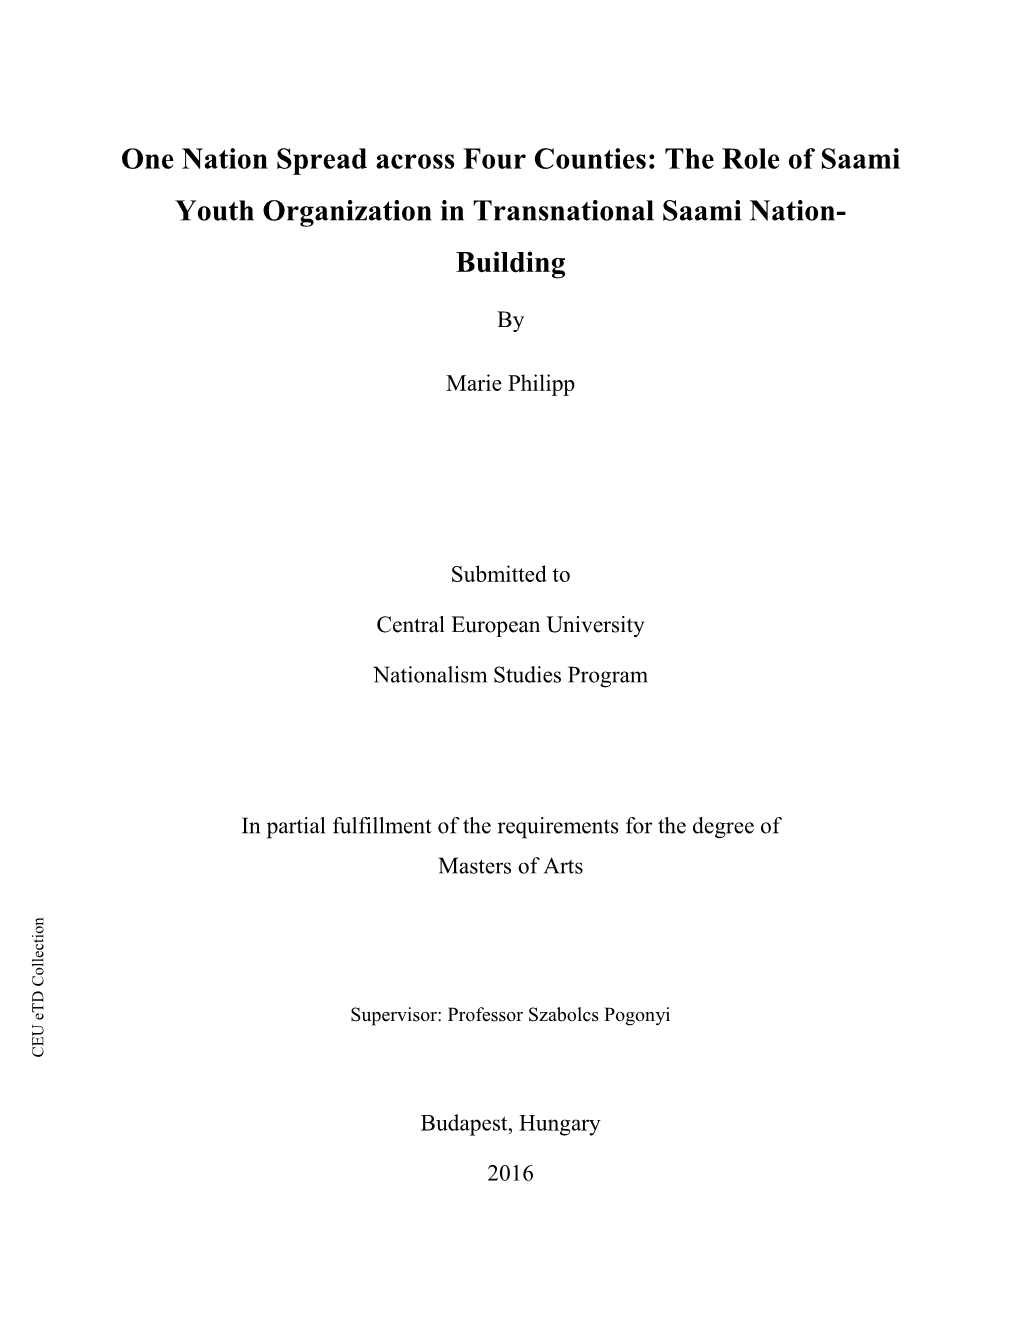 The Role of Saami Youth Organization in Transnational Saami Nation- Building